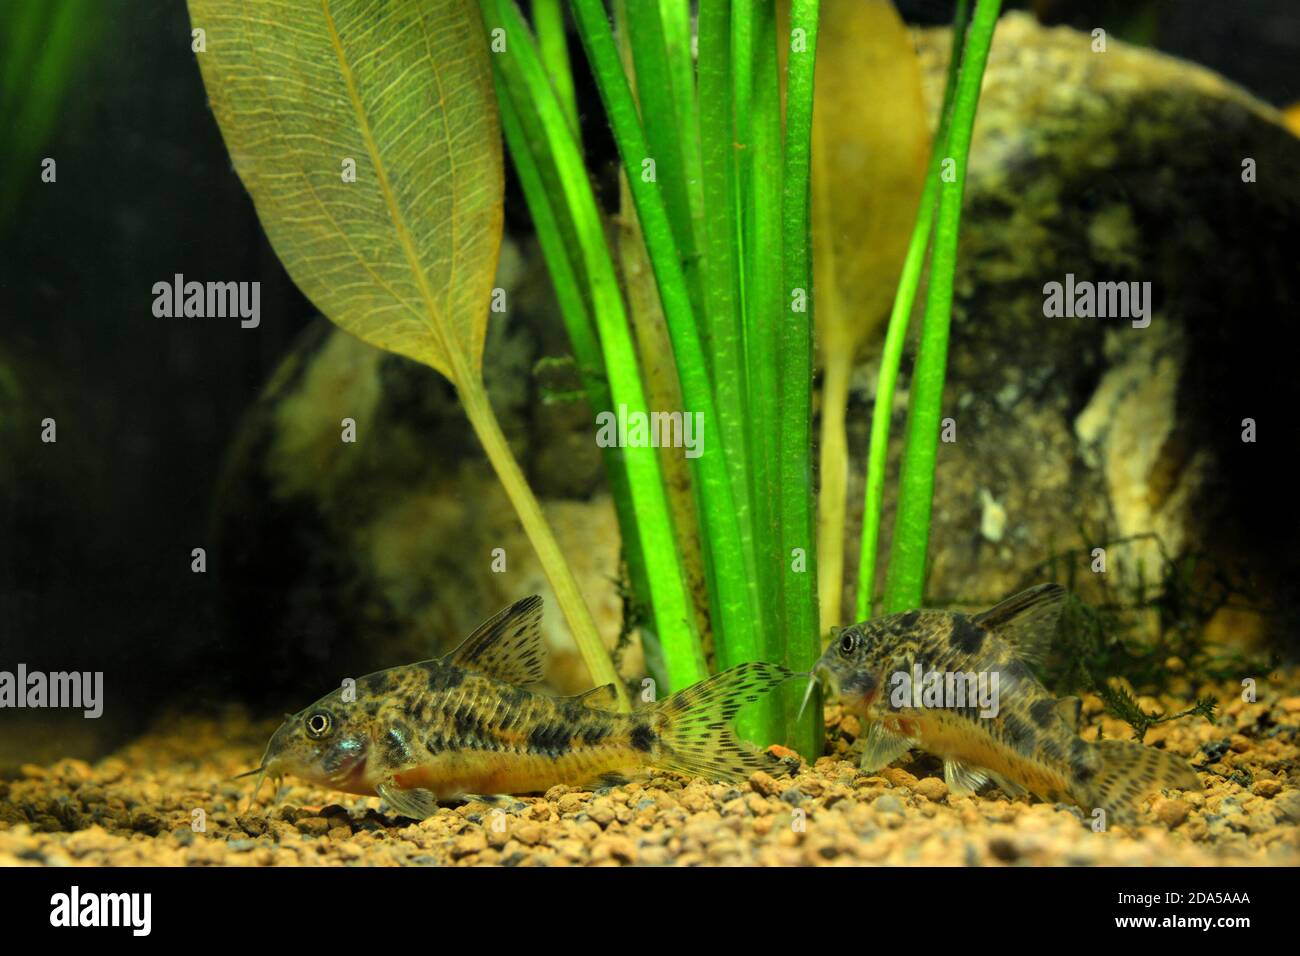 Corydoras fish in front of aquatic plants. This is a freshwater catfish and river fish. Stock Photo